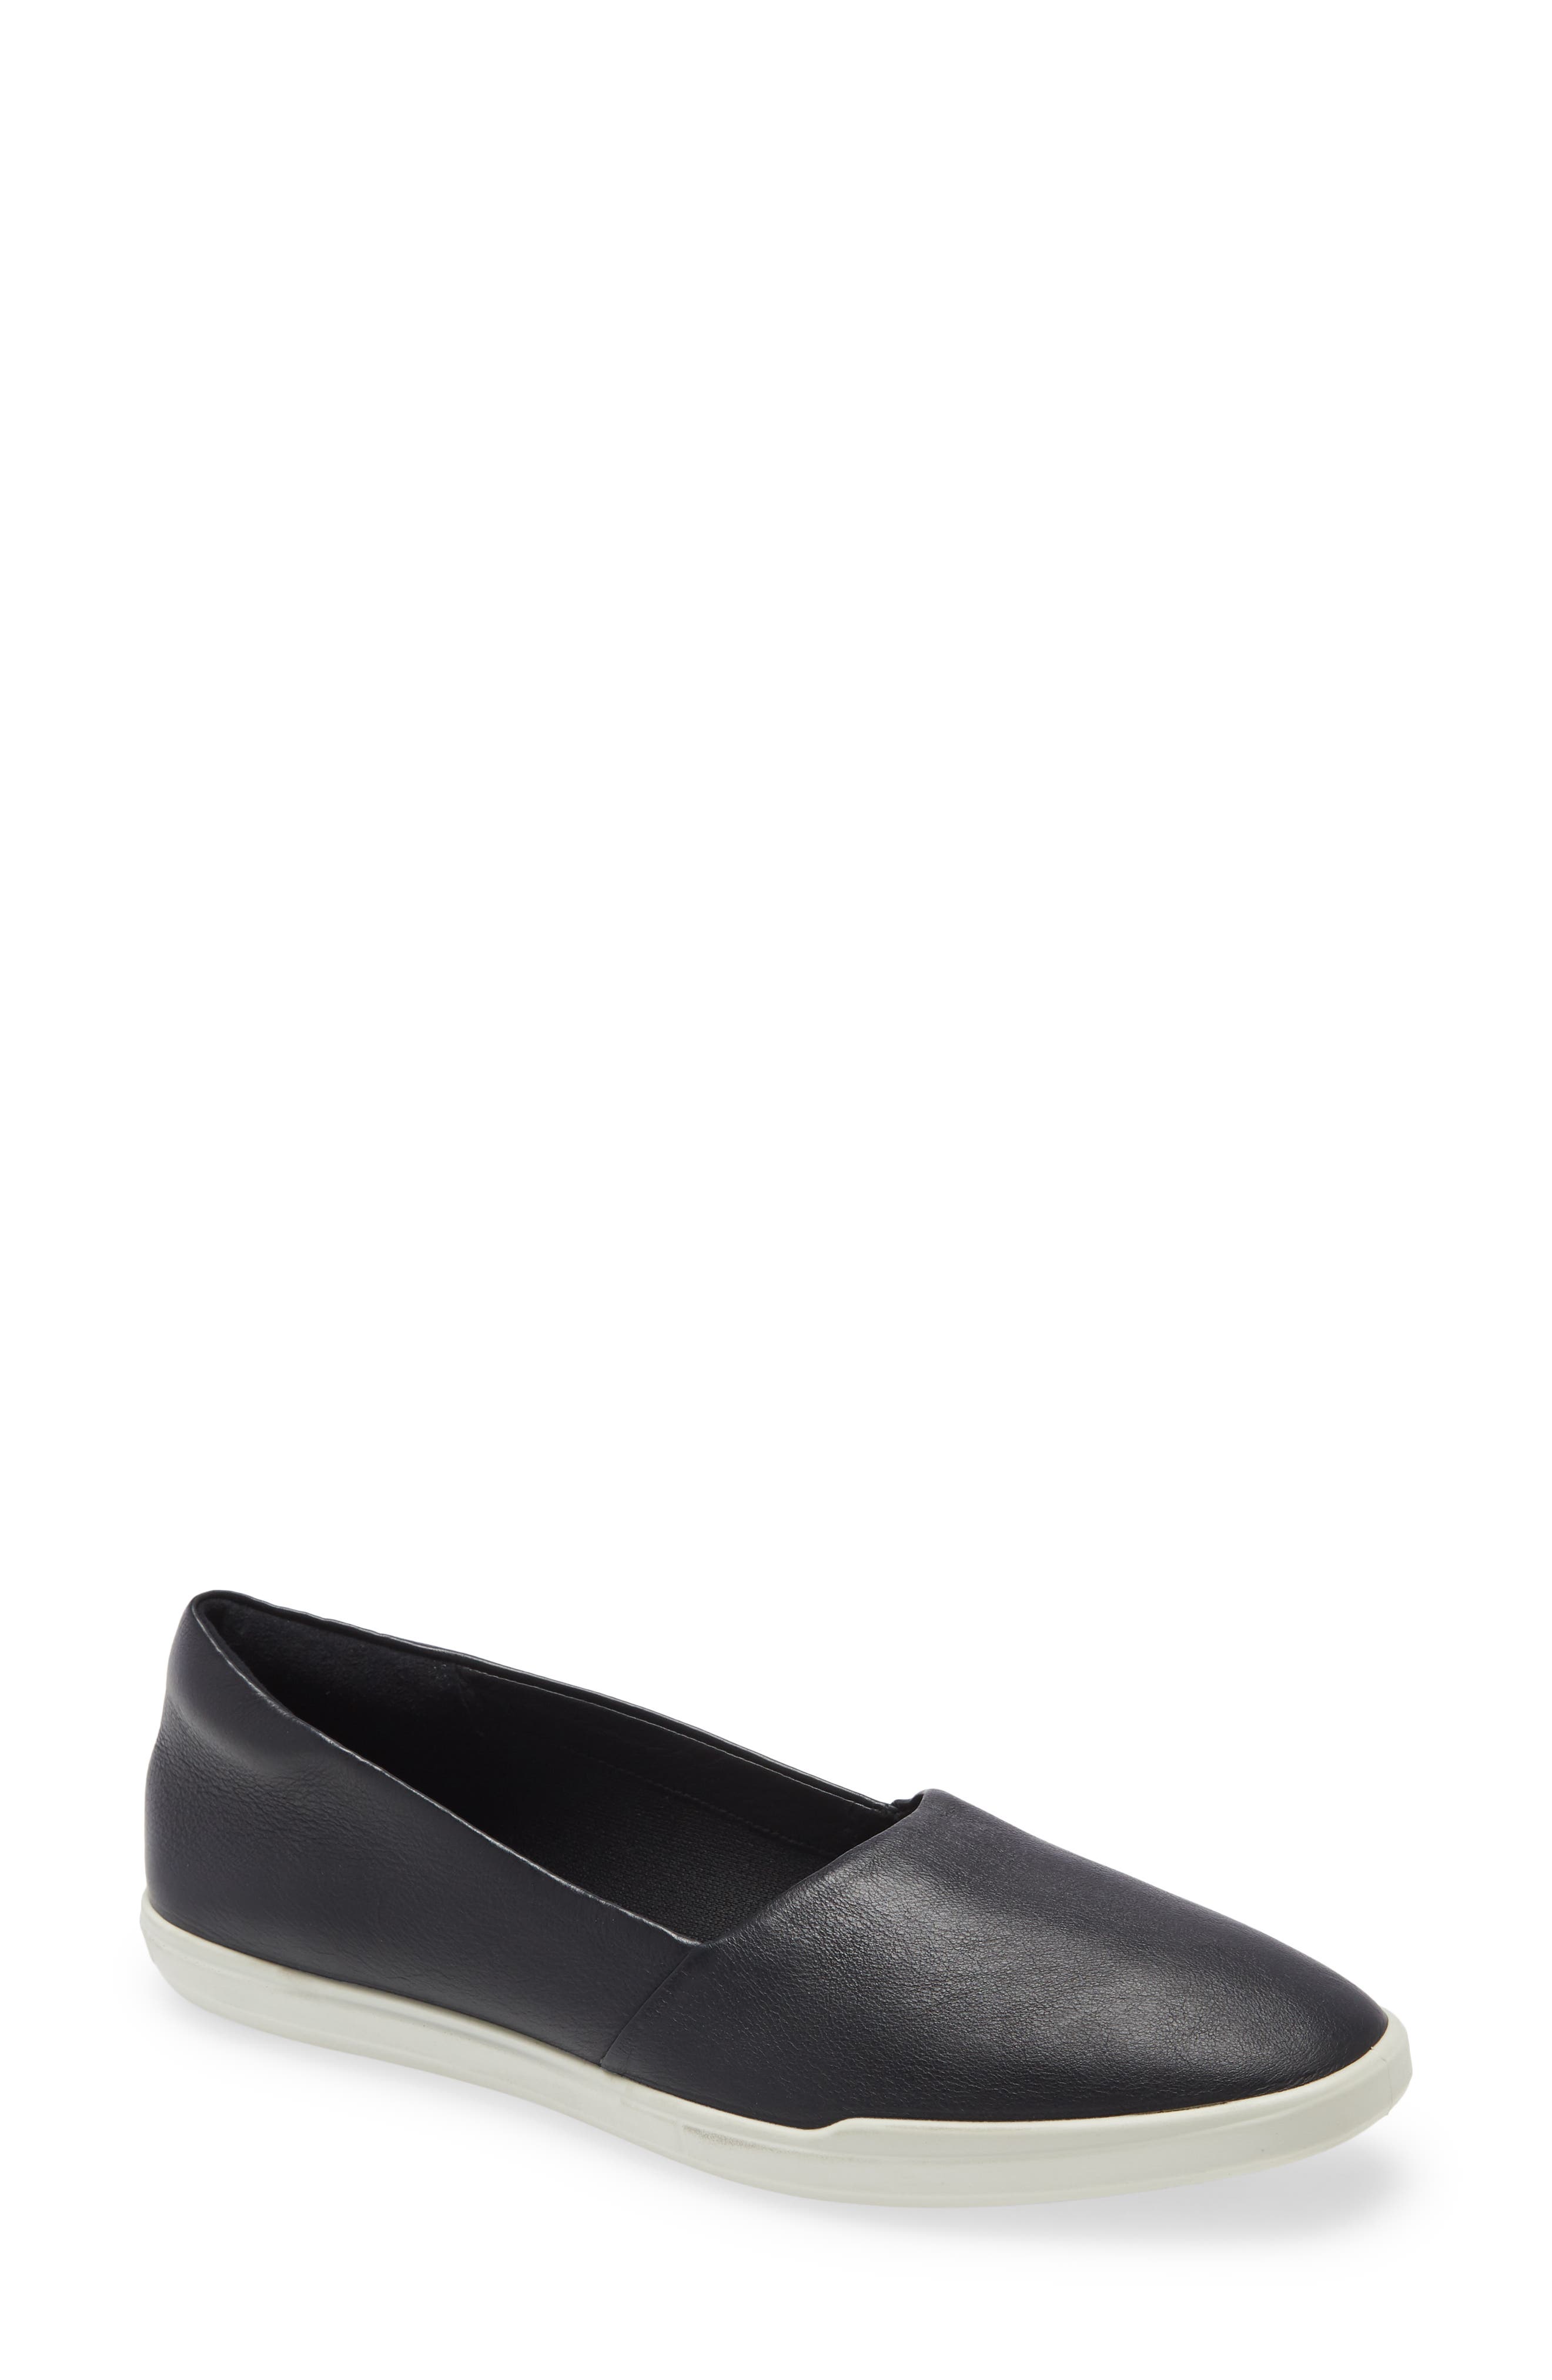 ECCO Simpil Loafer in Black White Leather